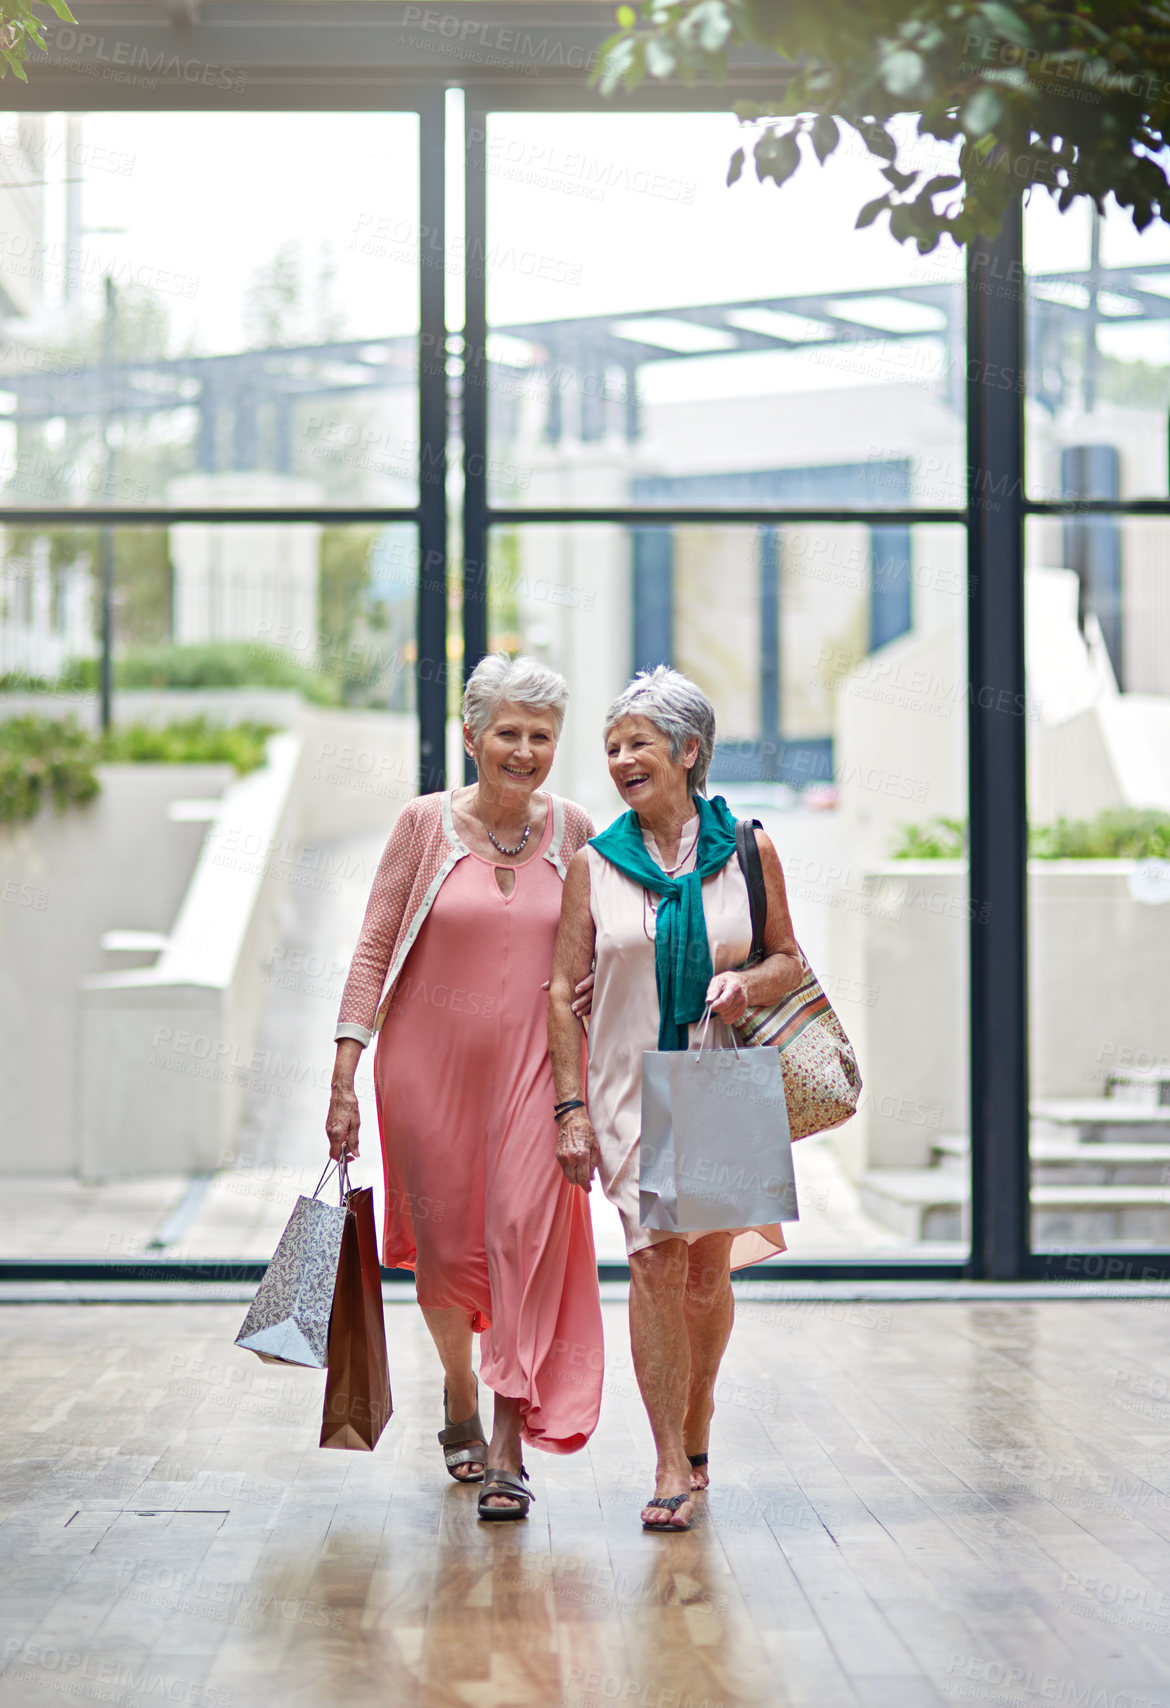 Buy stock photo Full length portrait of a two senior women out on a shopping spree